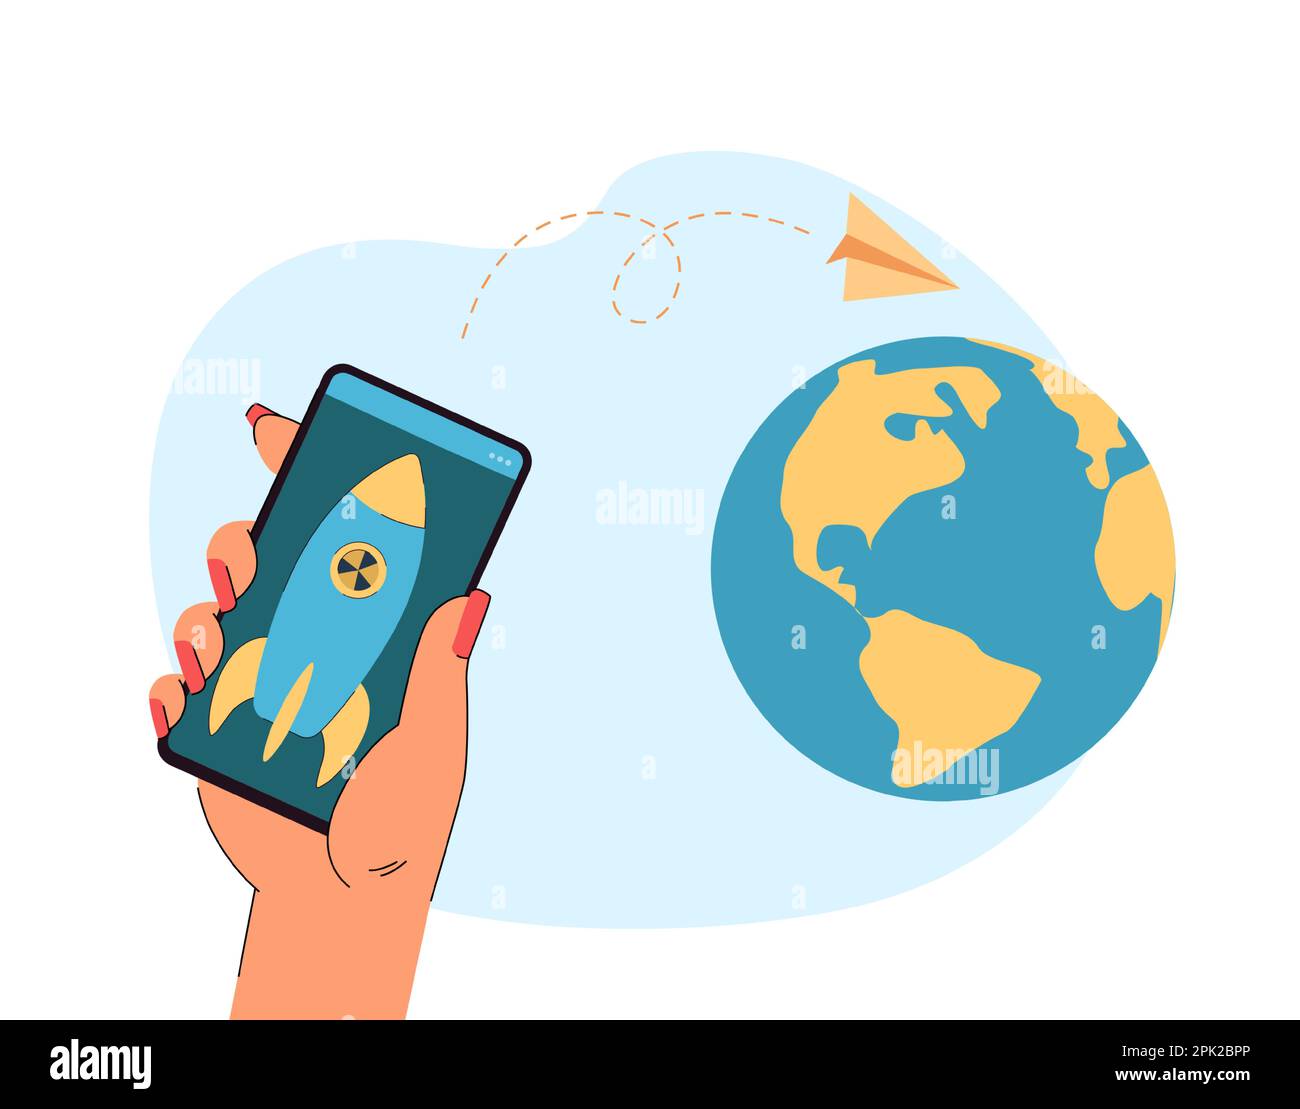 Missile on phone screen in human hand flat vector illustration Stock Vector